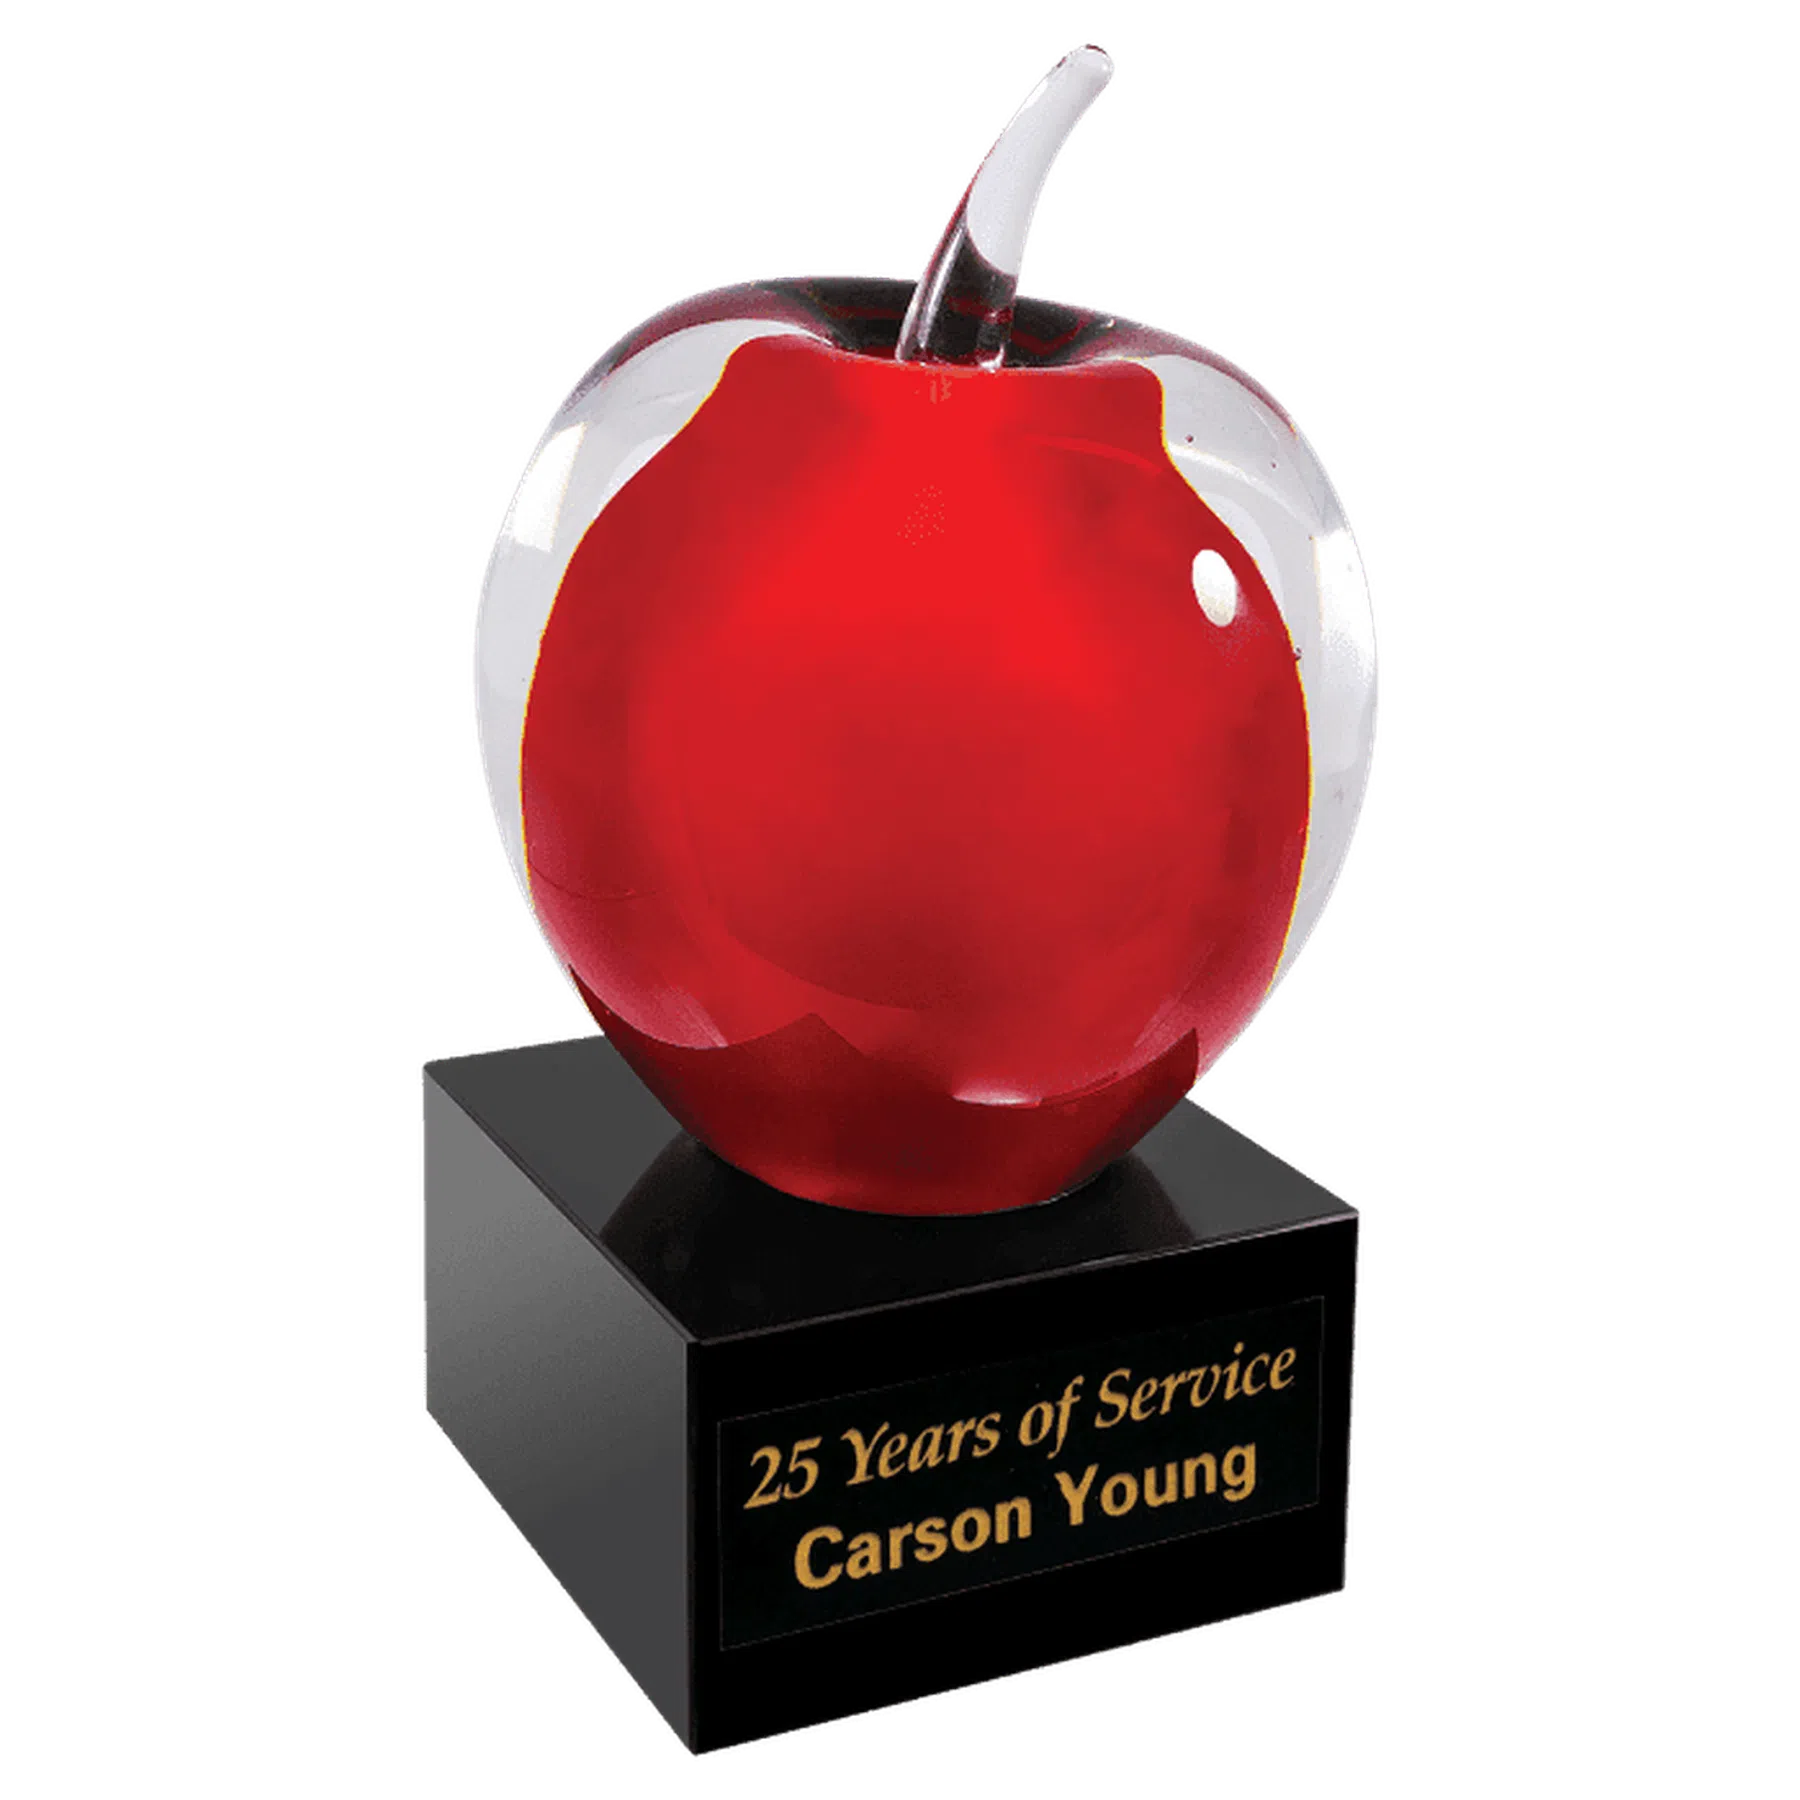 5 3/4" Red 3D Art Glass Apple with Black Base